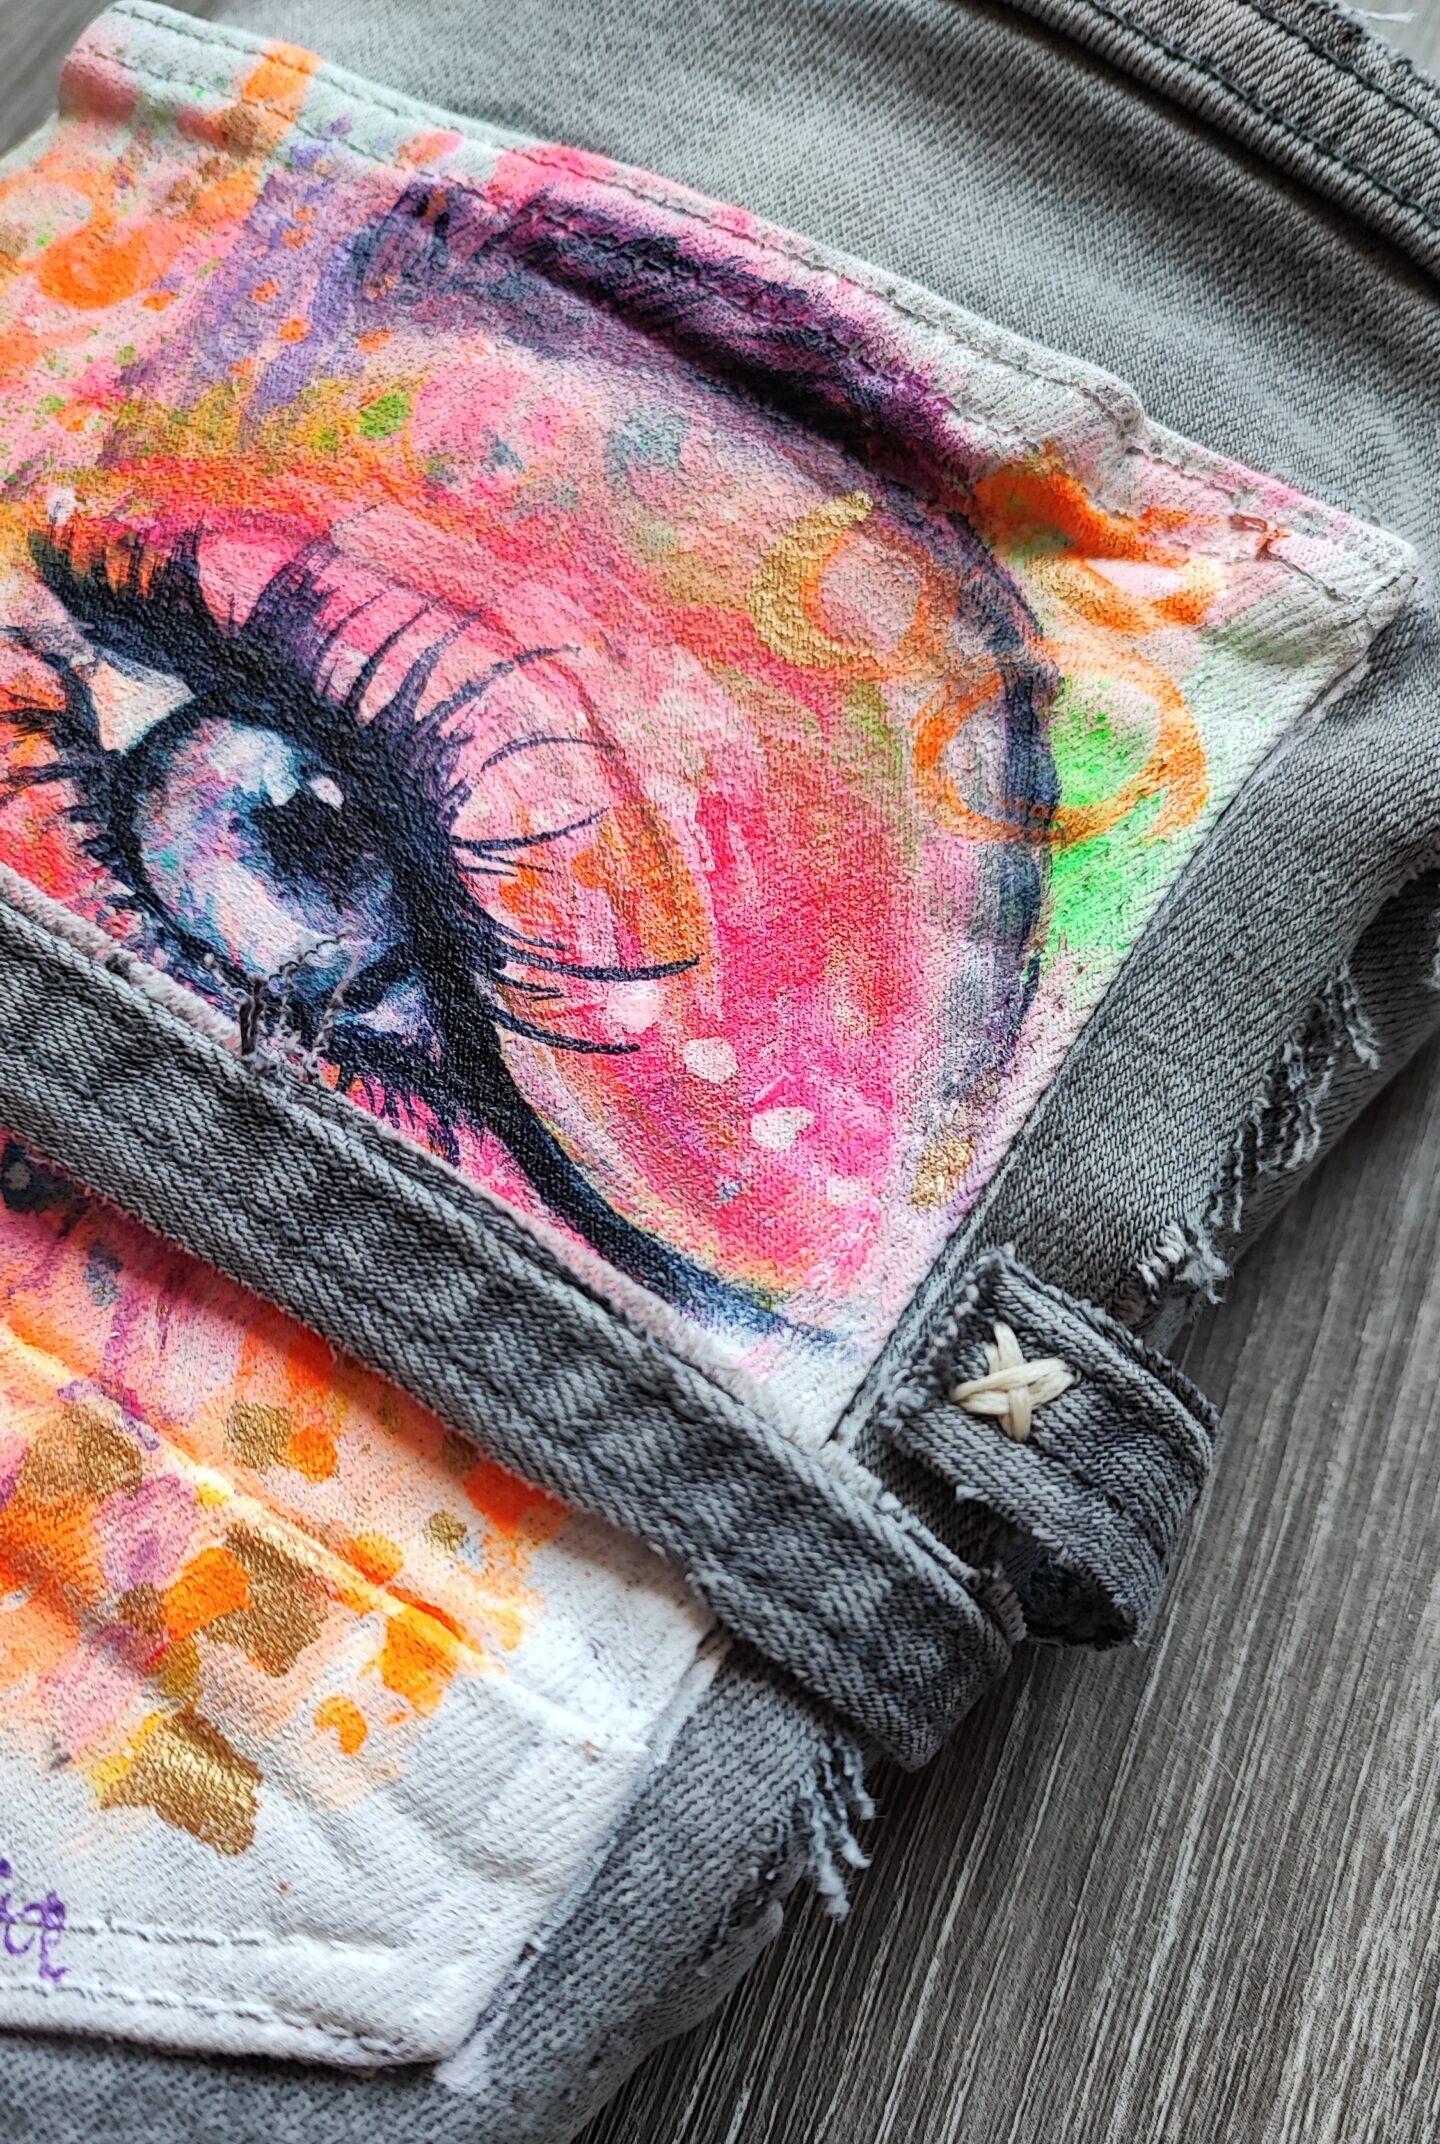 The painted jeans art journal lesson